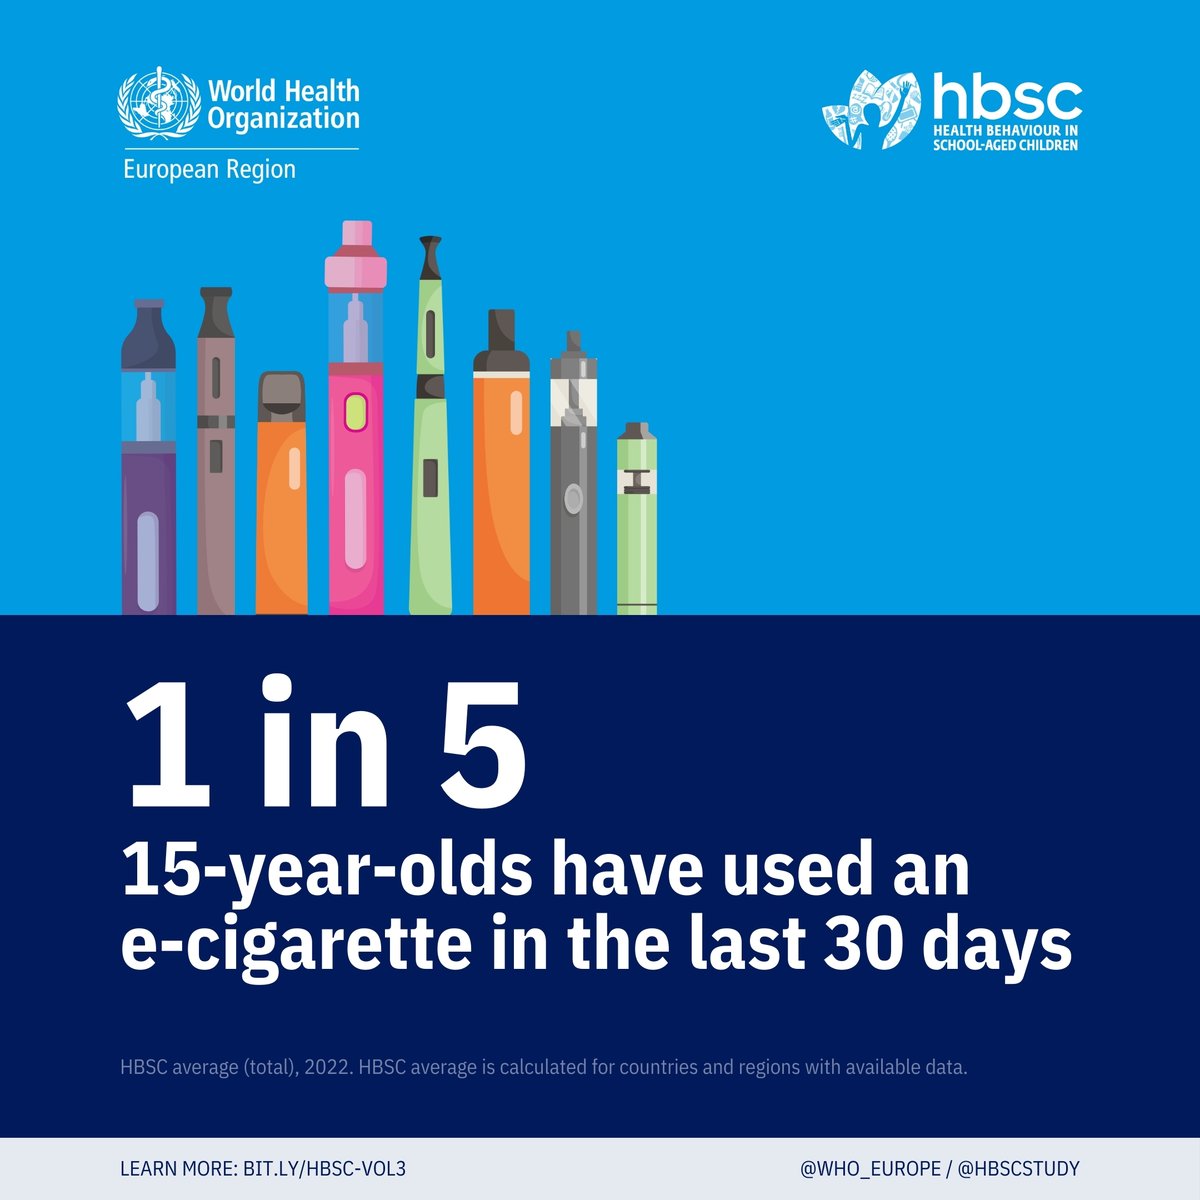 Alcohol is the most commonly used substance, while vaping is now more common than cigarette smoking among young people. #AdolescentHealth

Latest @WHO_Europe @HBSCStudy report👉gla.ac.uk/news/headline_…